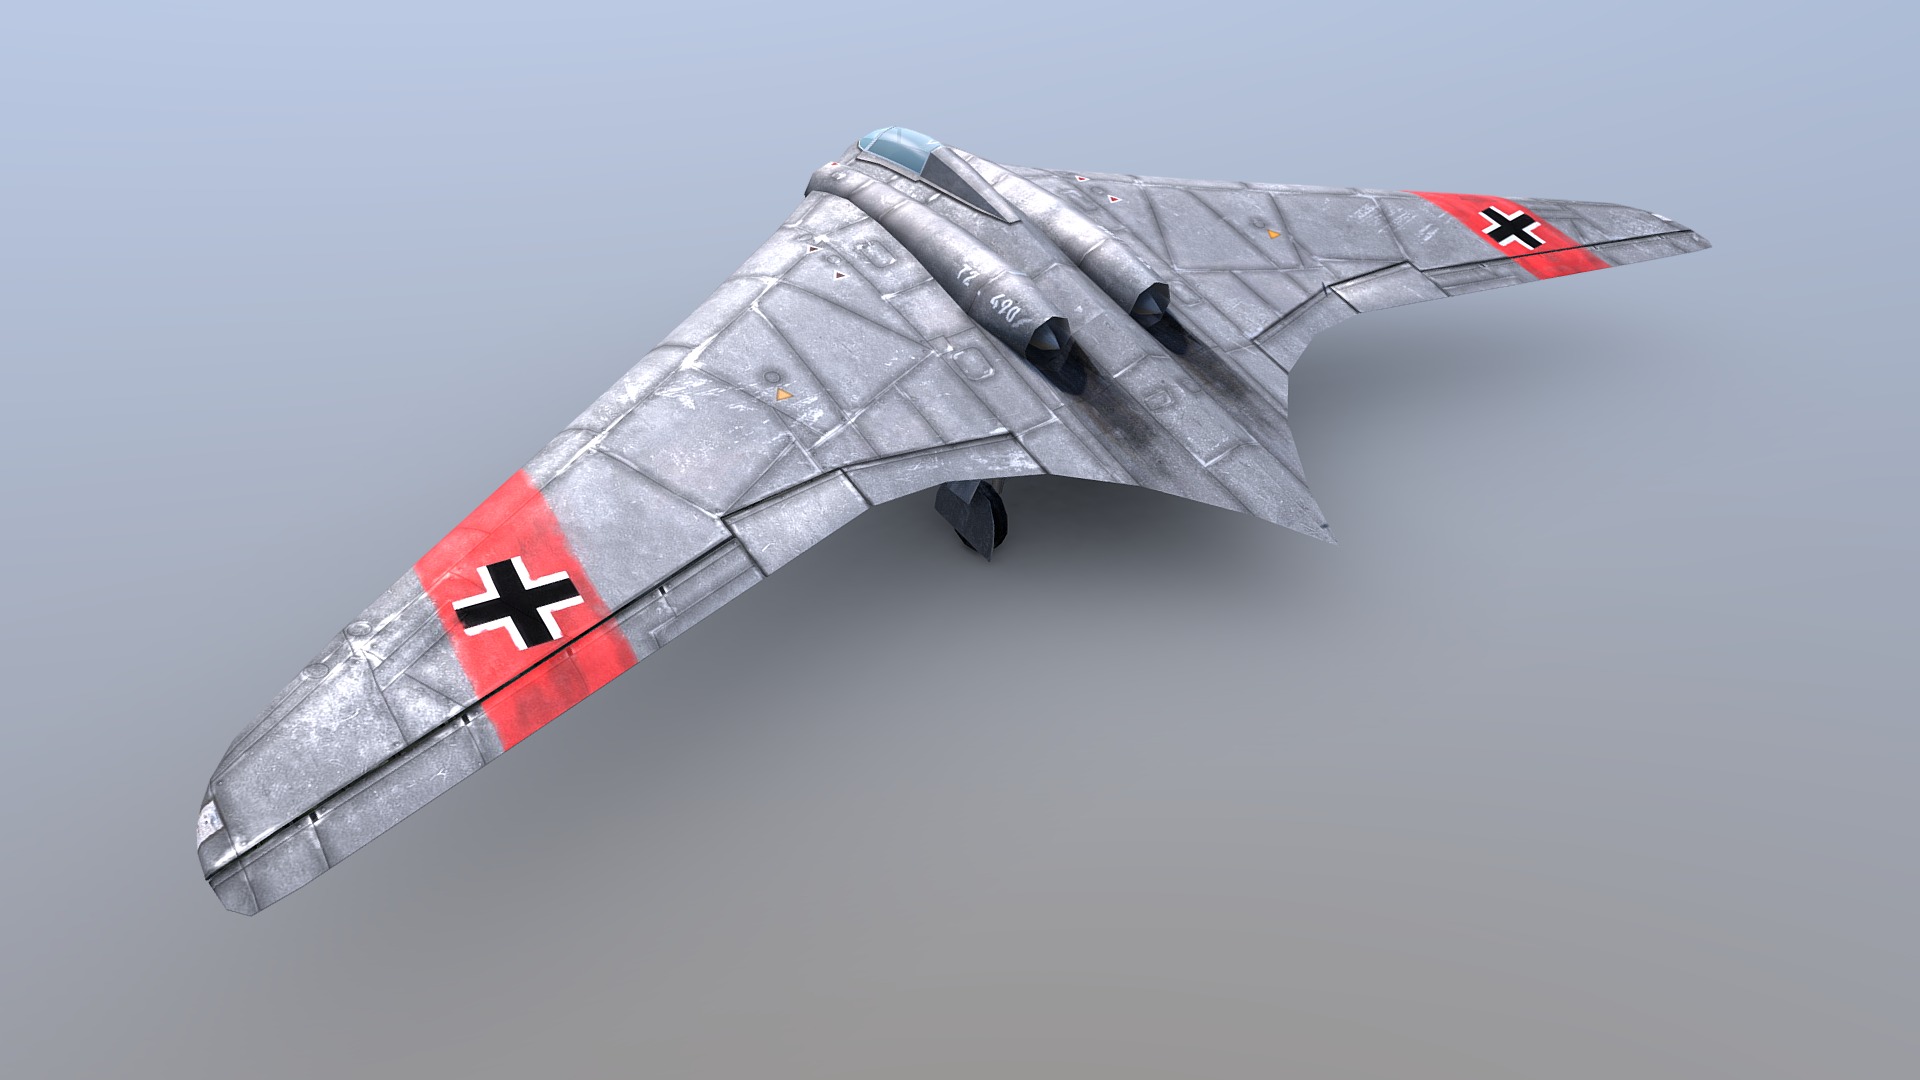 3D model Horten Plane / WW II/ Prop - This is a 3D model of the Horten Plane / WW II/ Prop. The 3D model is about a jet flying in the sky.